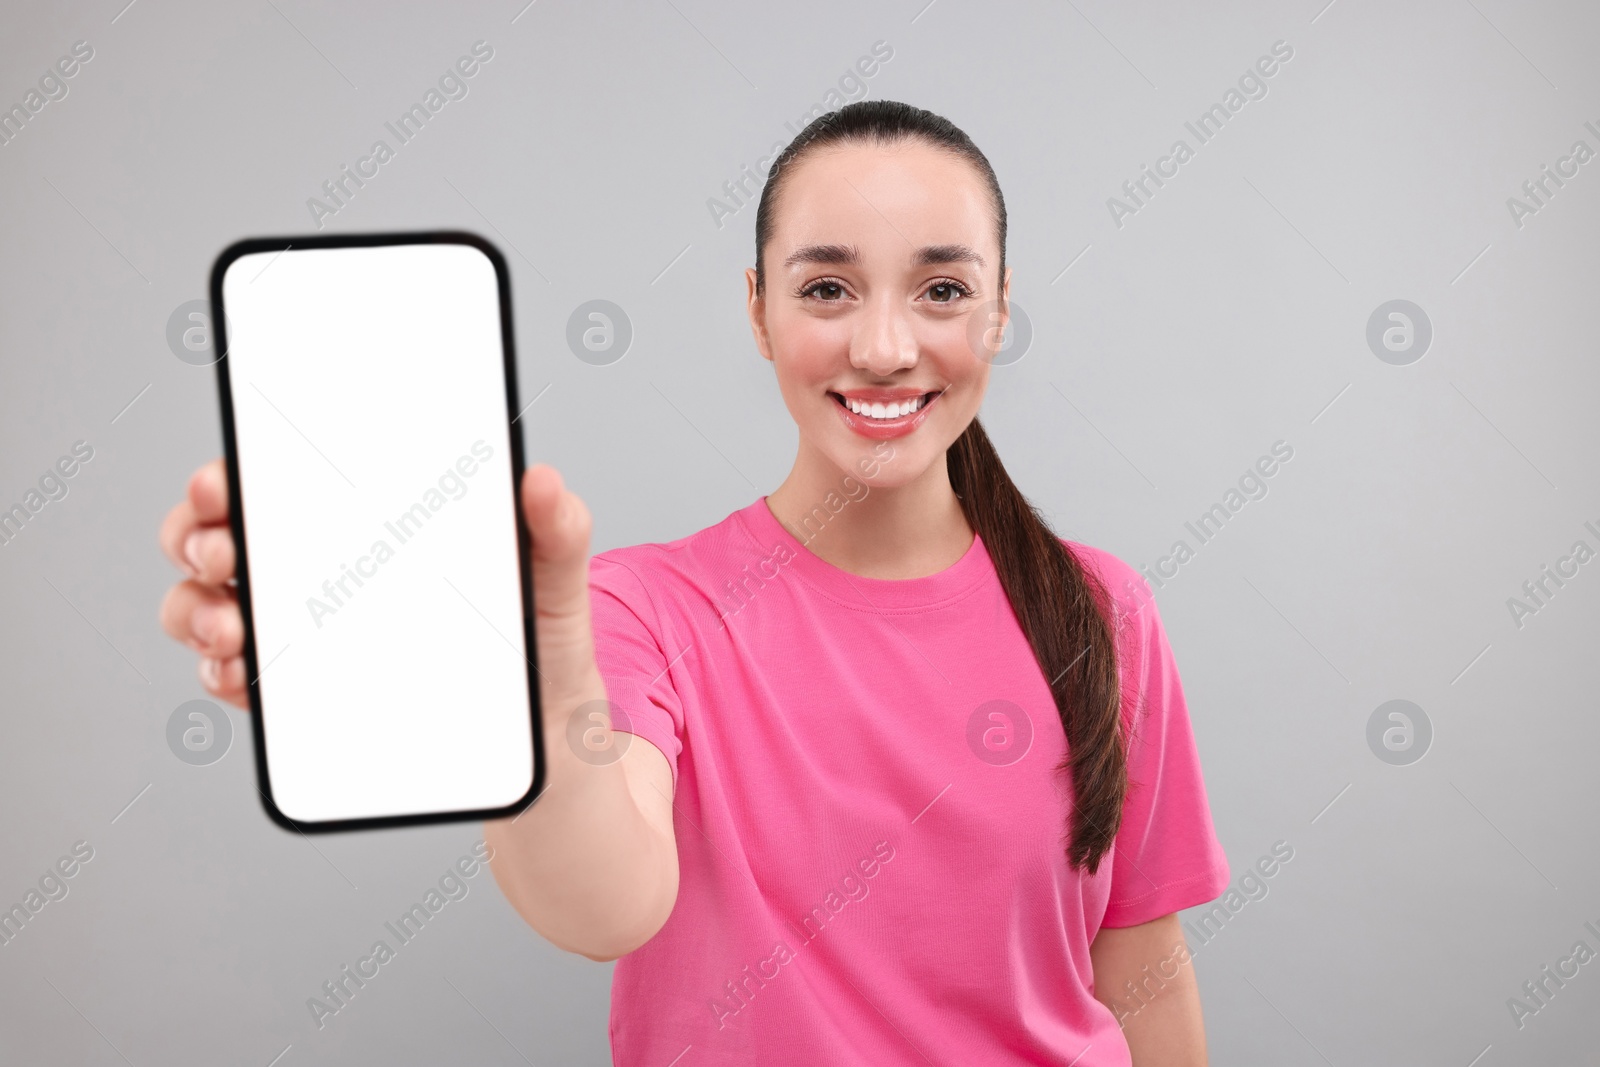 Photo of Young woman showing smartphone in hand on light grey background